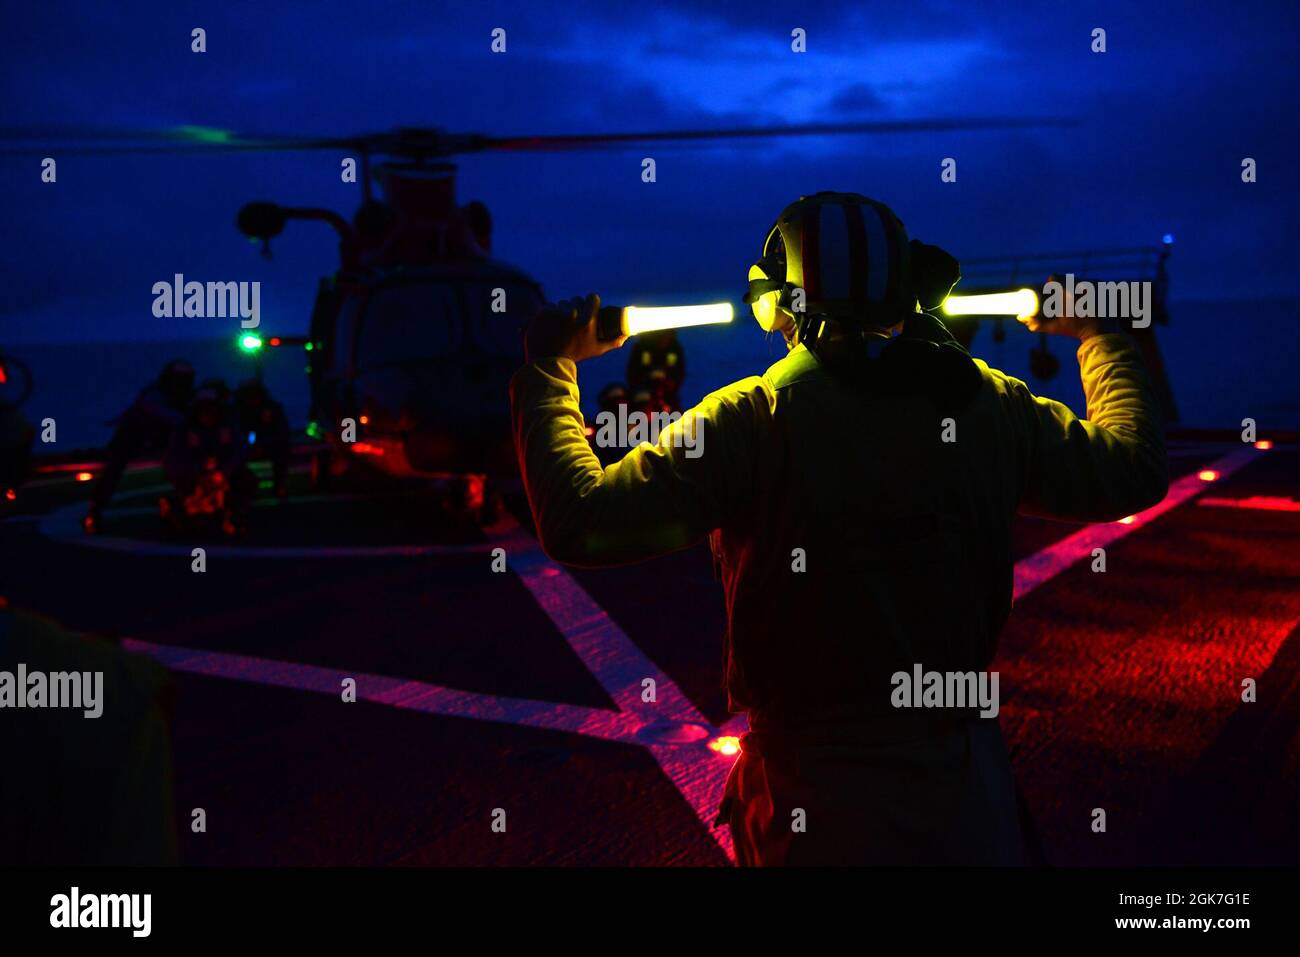 Ens. Ryan Dunkle, a Coast Guard Cutter Healy (WAGB 20) crewmember, gives commands to a tie-down team during nighttime joint flight training operations with an Air Station Kodiak aircrew while off the coast of Alaska during Healy’s Arctic deployment on Aug. 25, 2021. Landing Signal Officers are responsible for communicating with the aircrew and cutter crewmembers during flight operations. Stock Photo